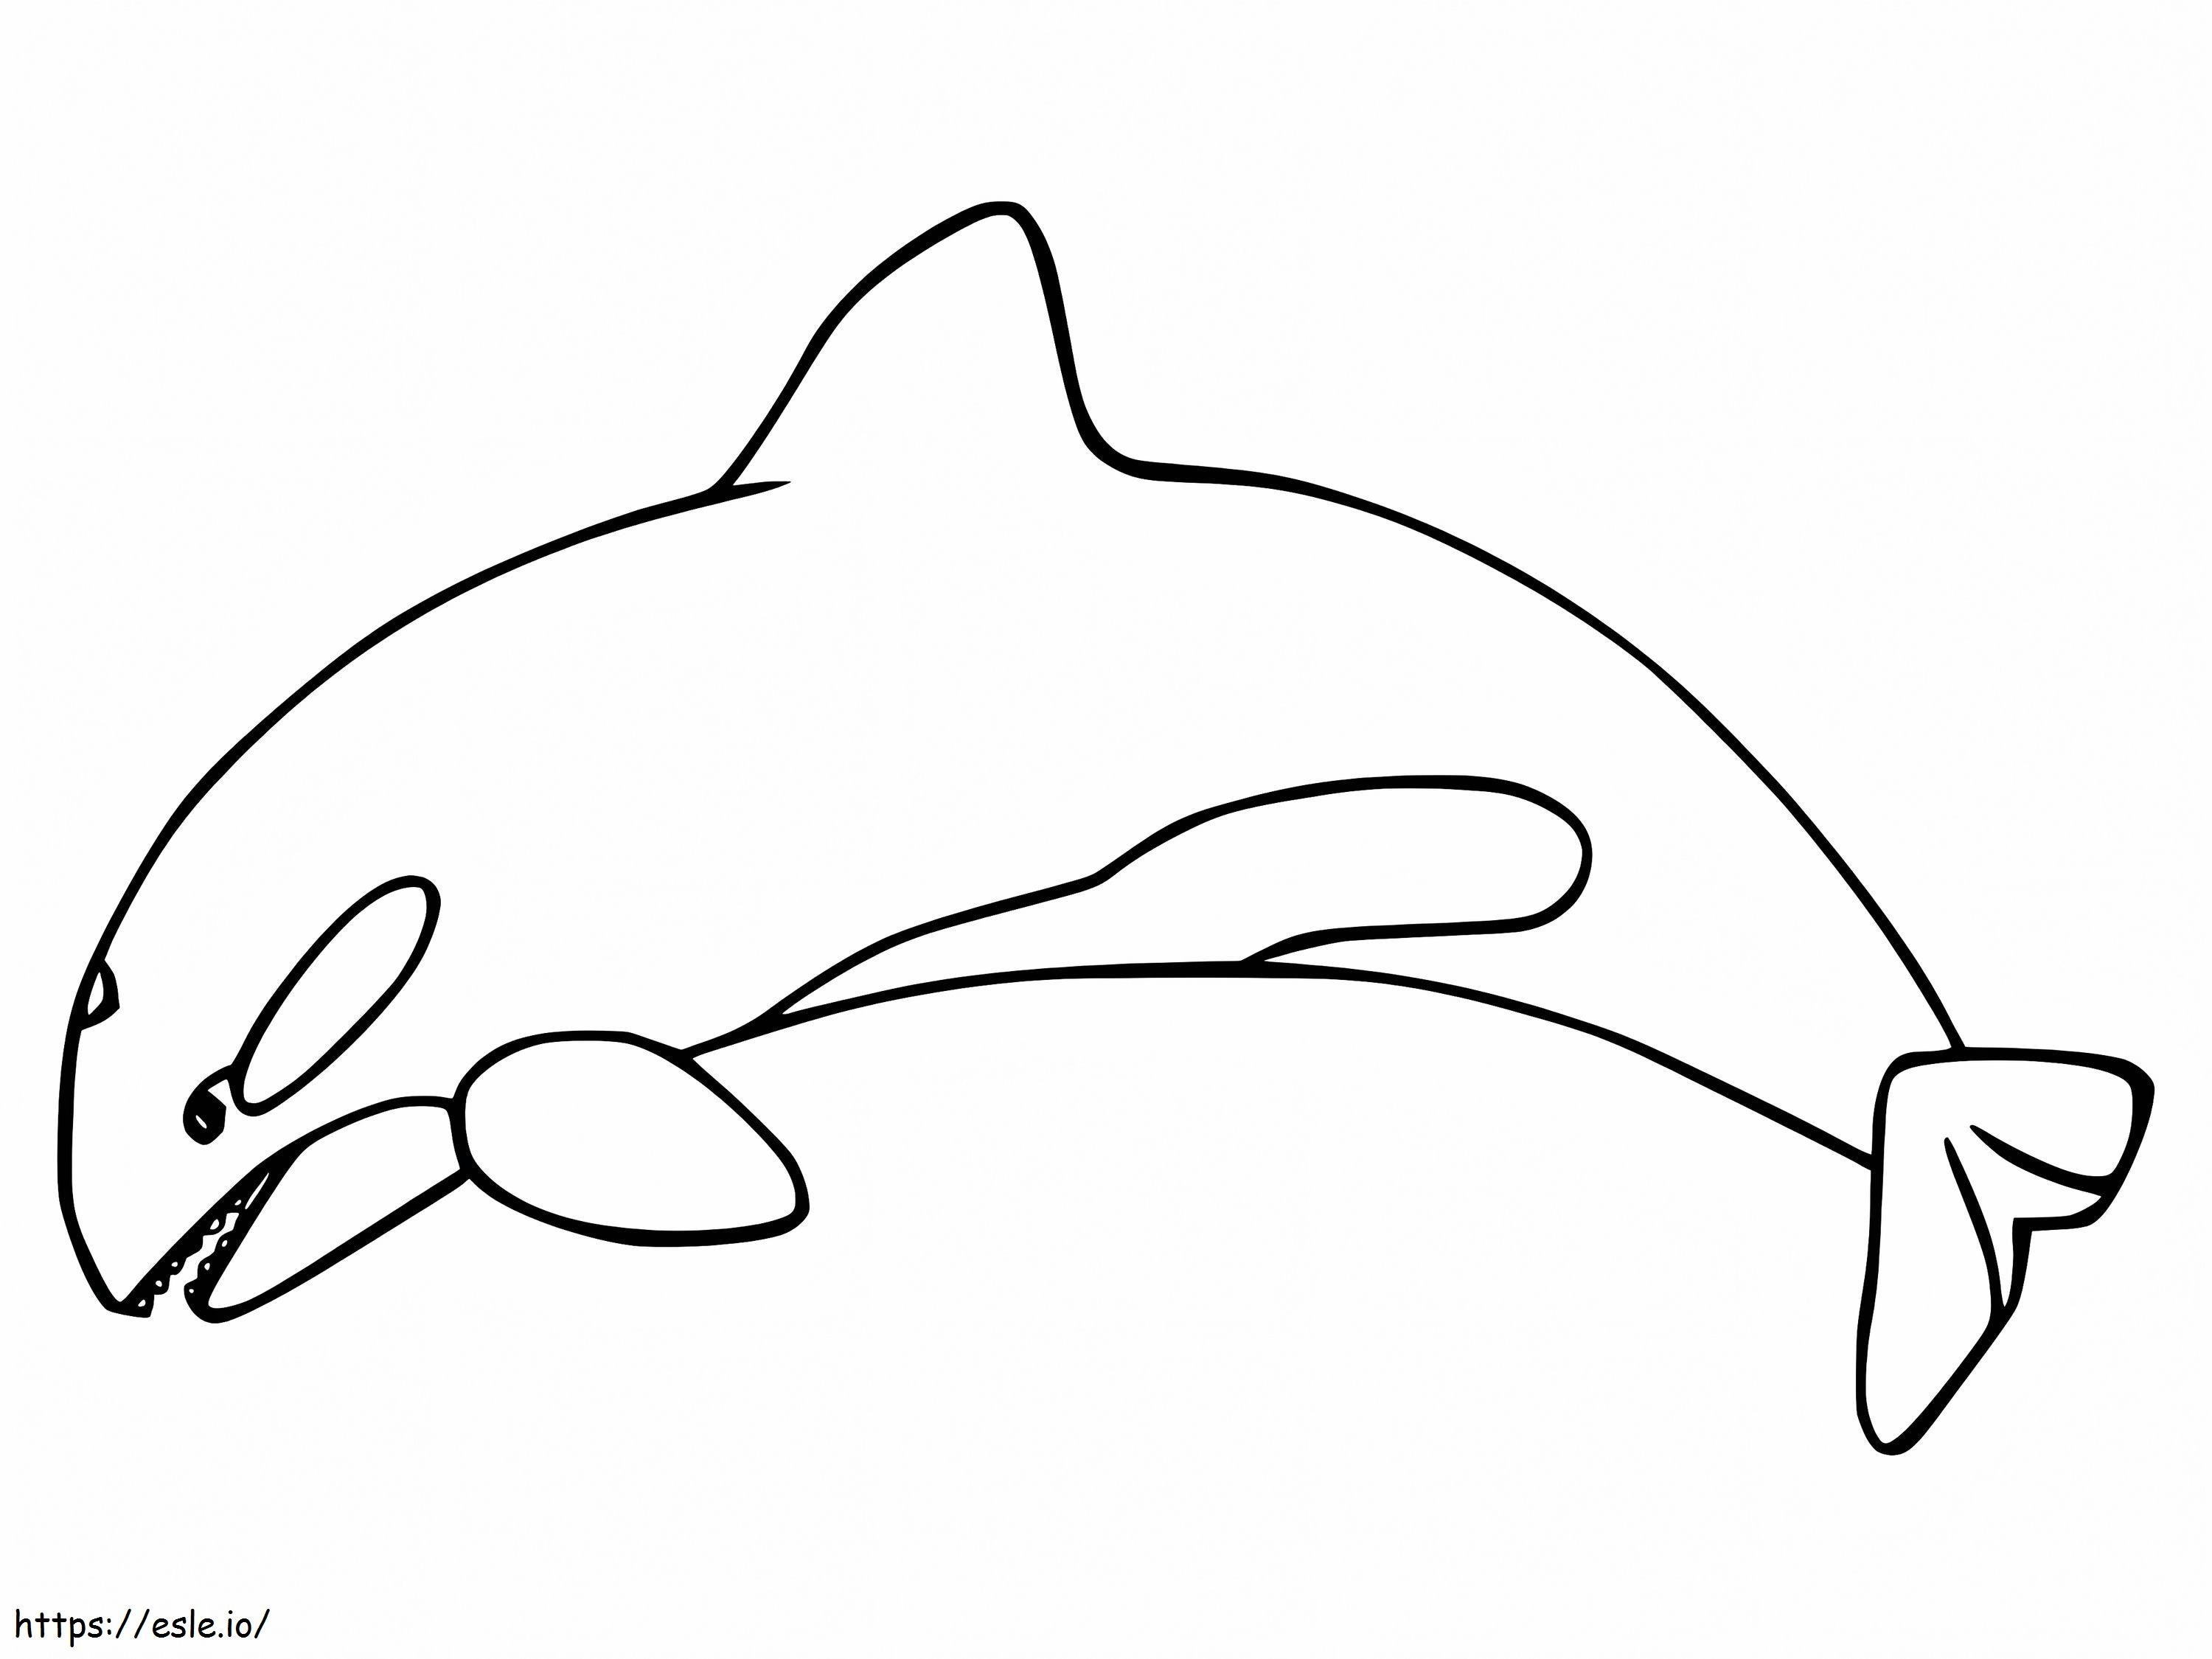 Free Orca Whale coloring page